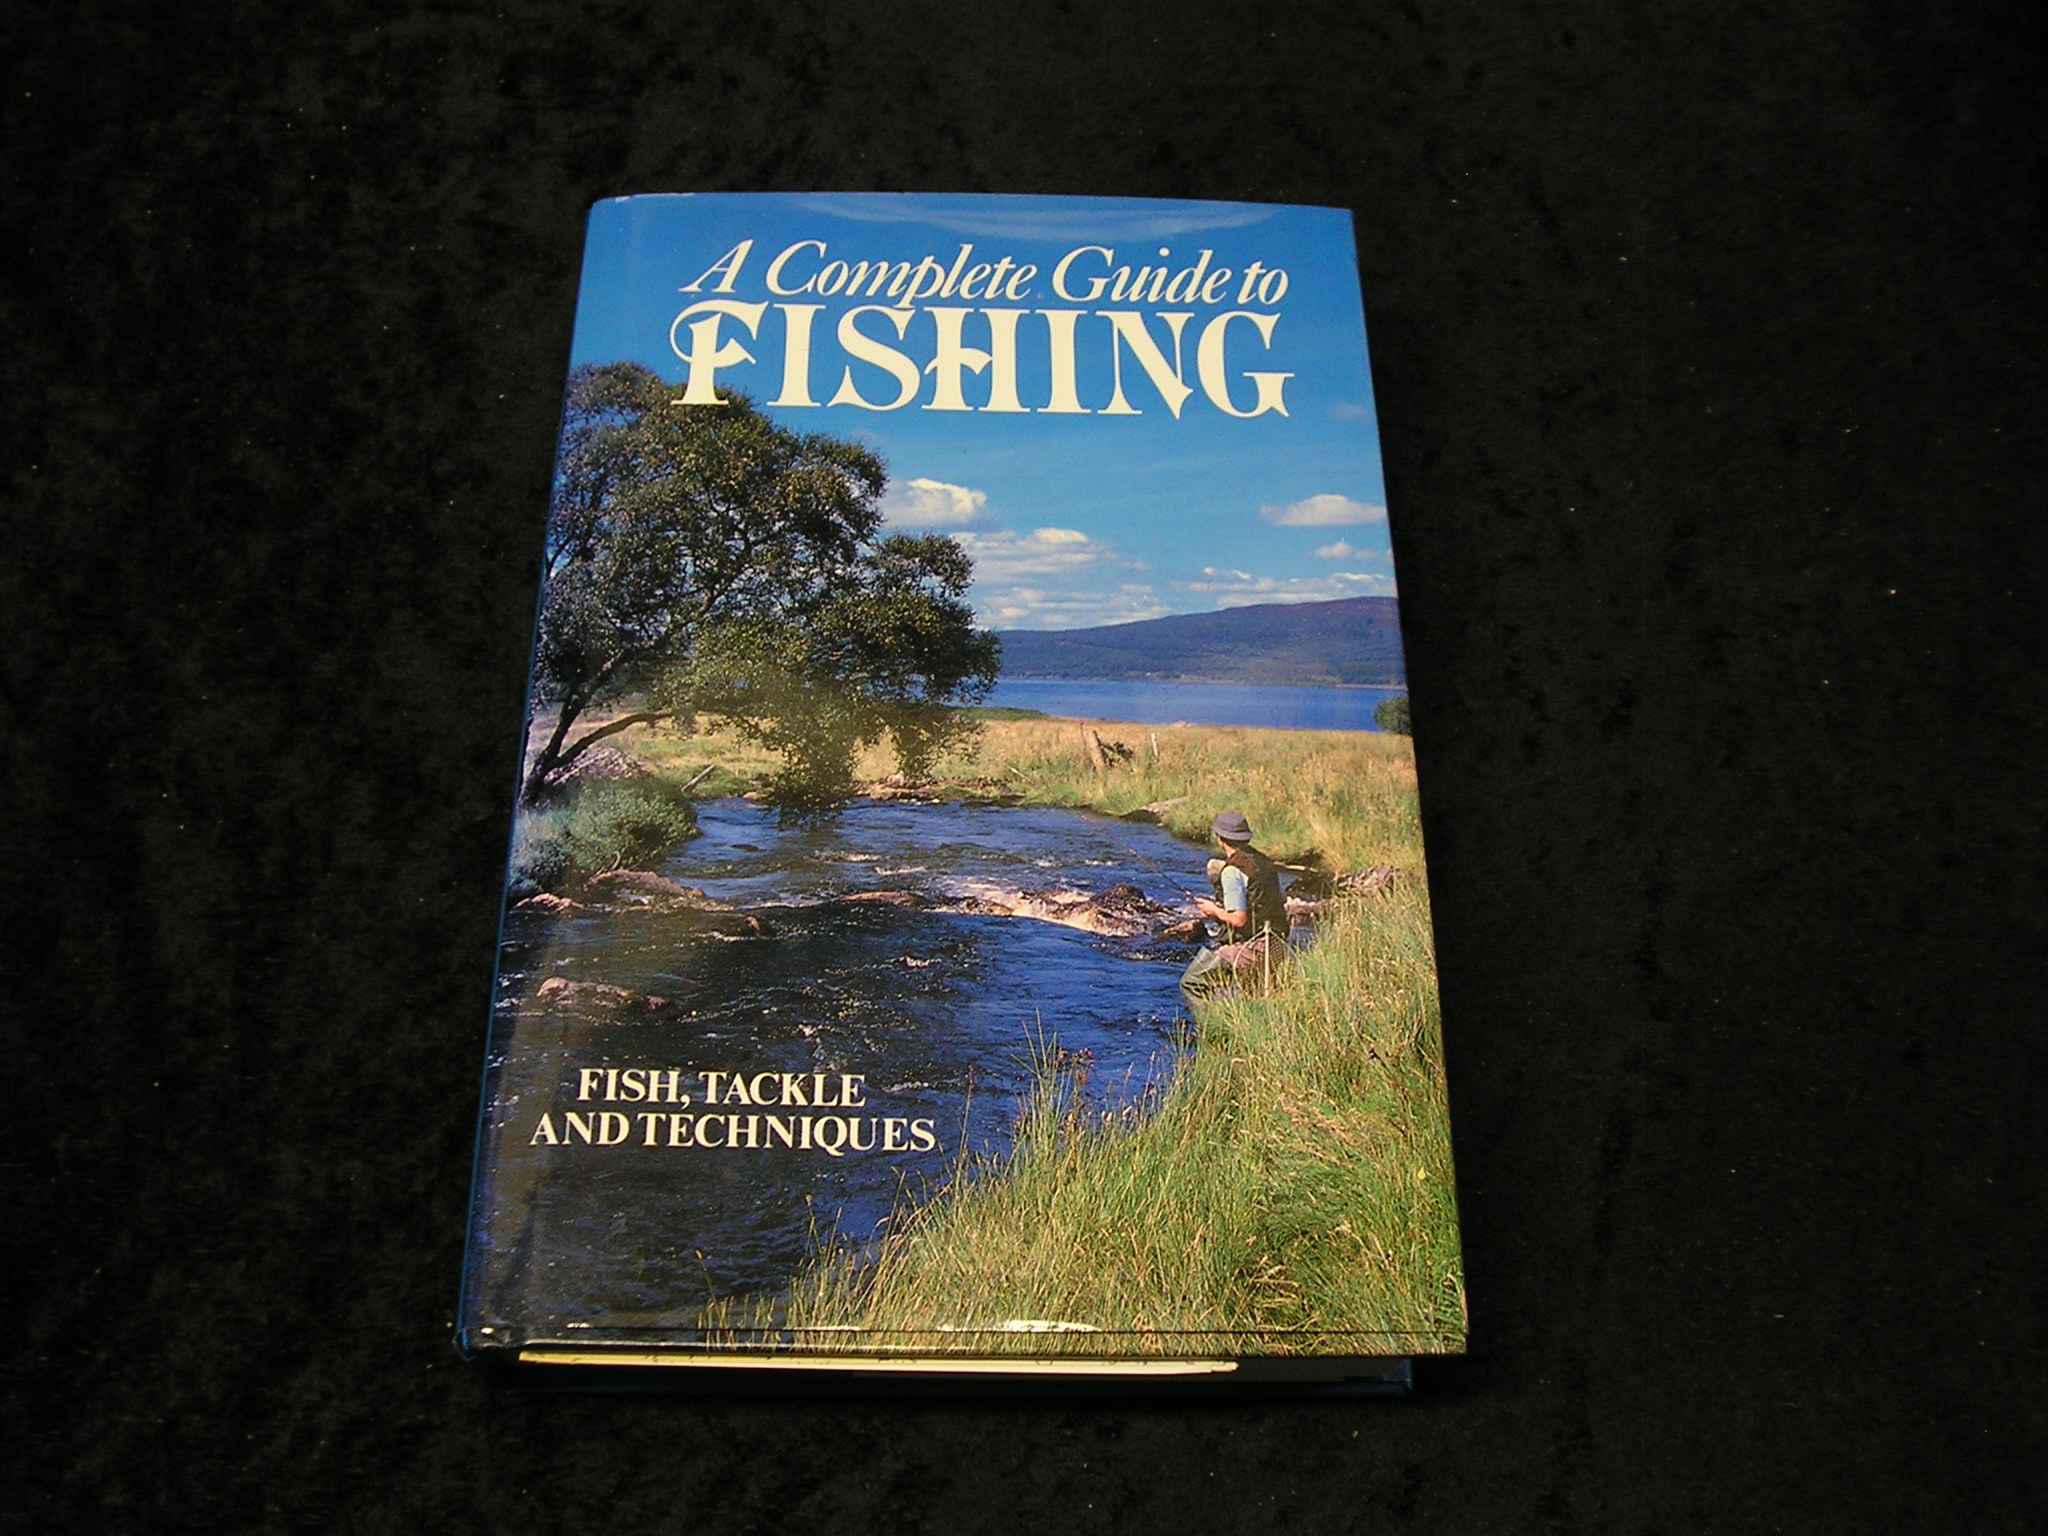 A Complete Guide to Fishing